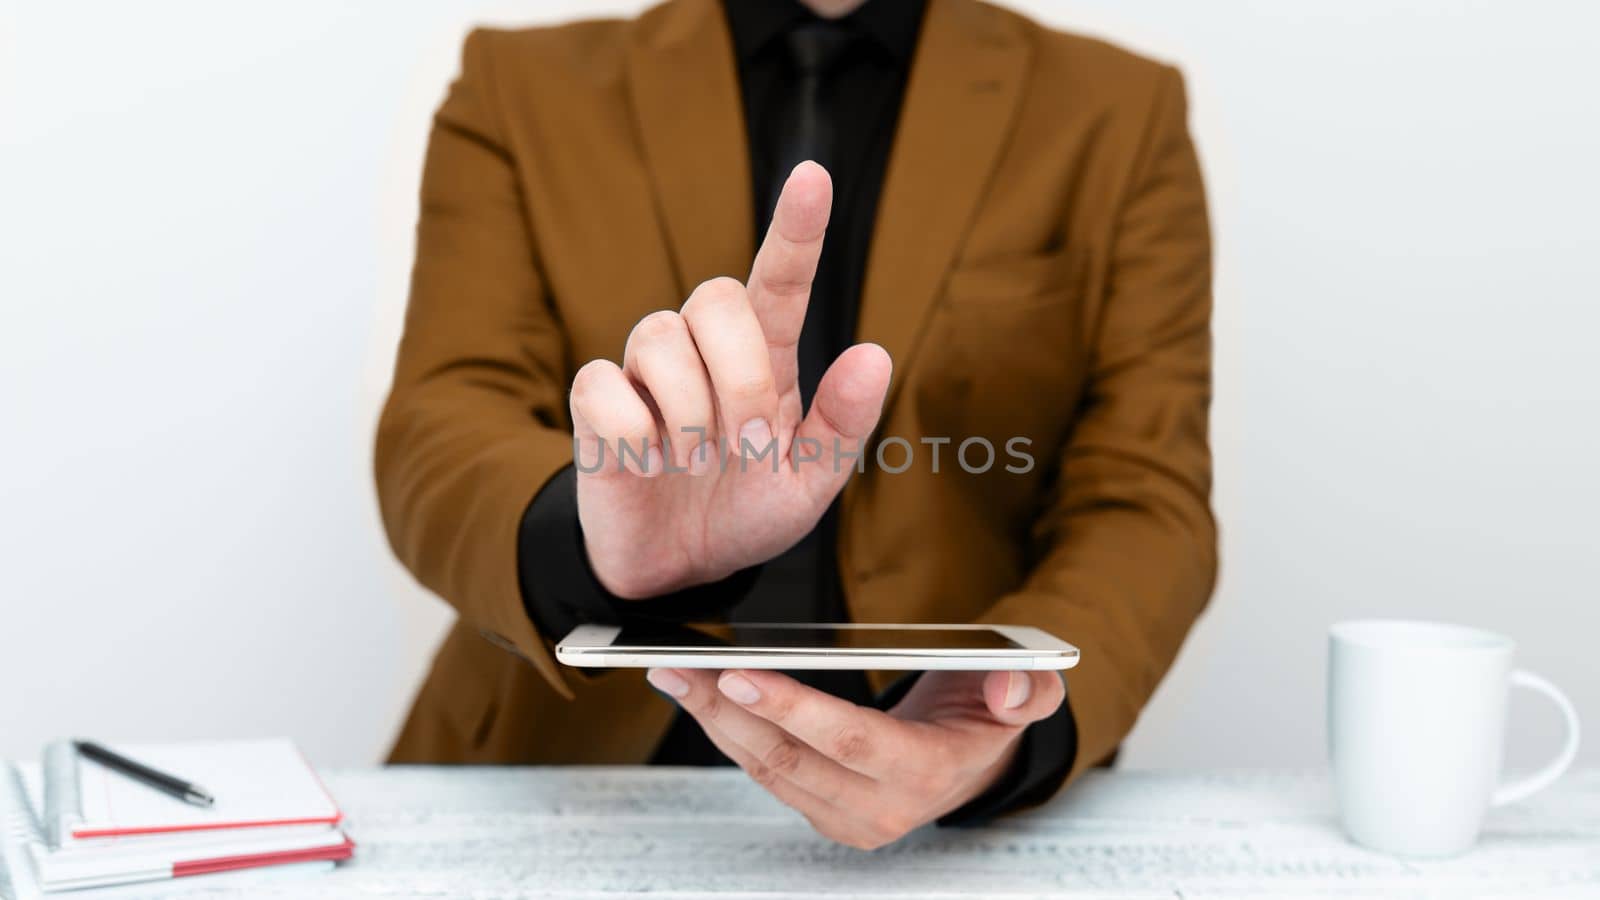 Businessman in a Brown jacket sitting at a table holding a mobile phone